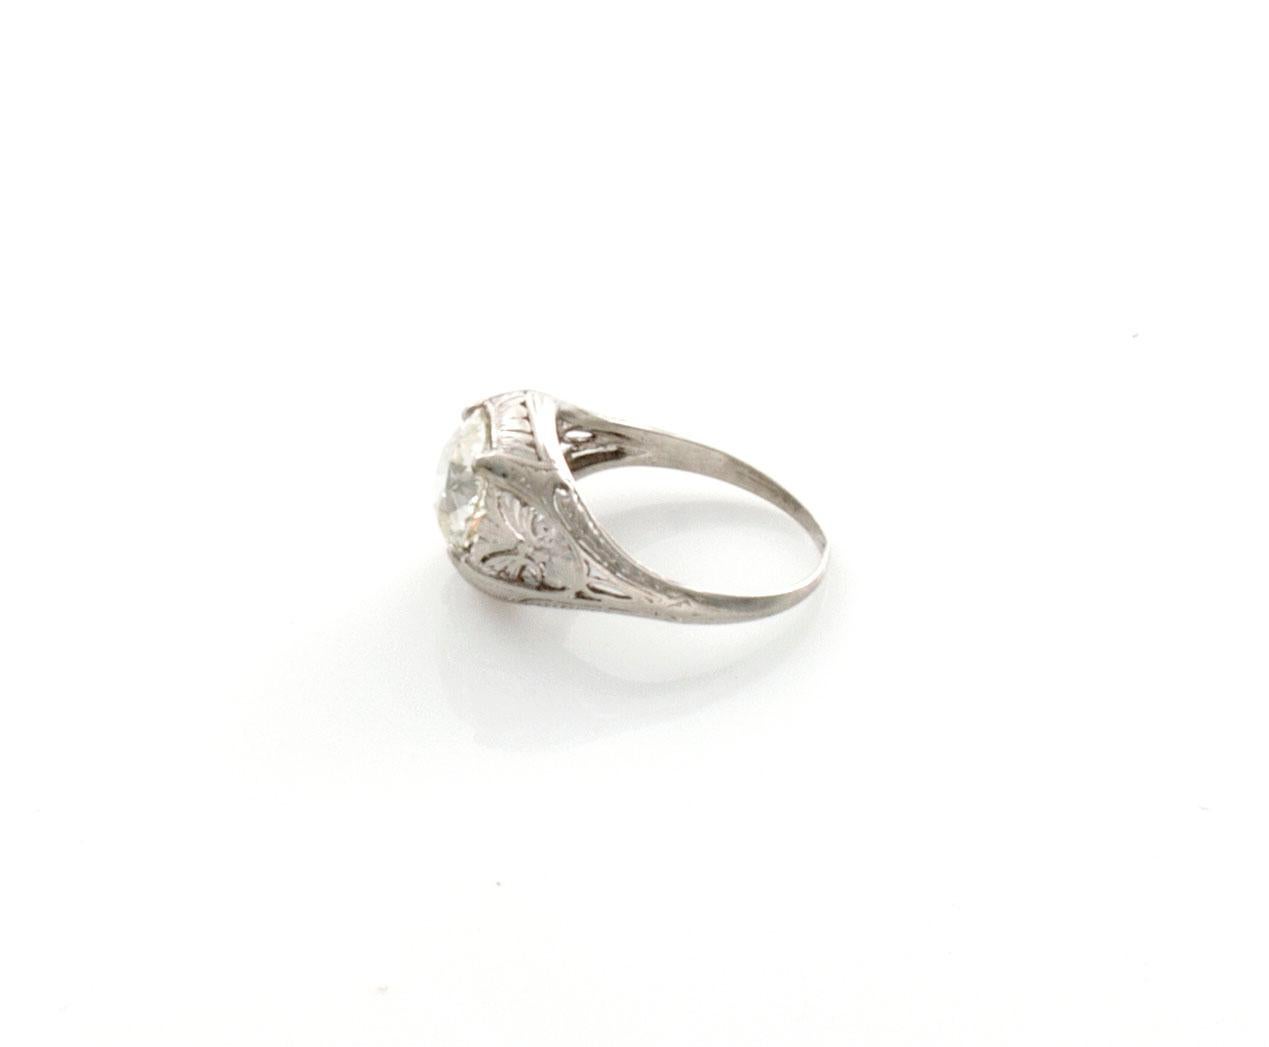 GIA Certified 2.55 Carat Diamond Art Deco Platinum Ring In Good Condition For Sale In Mobile, AL